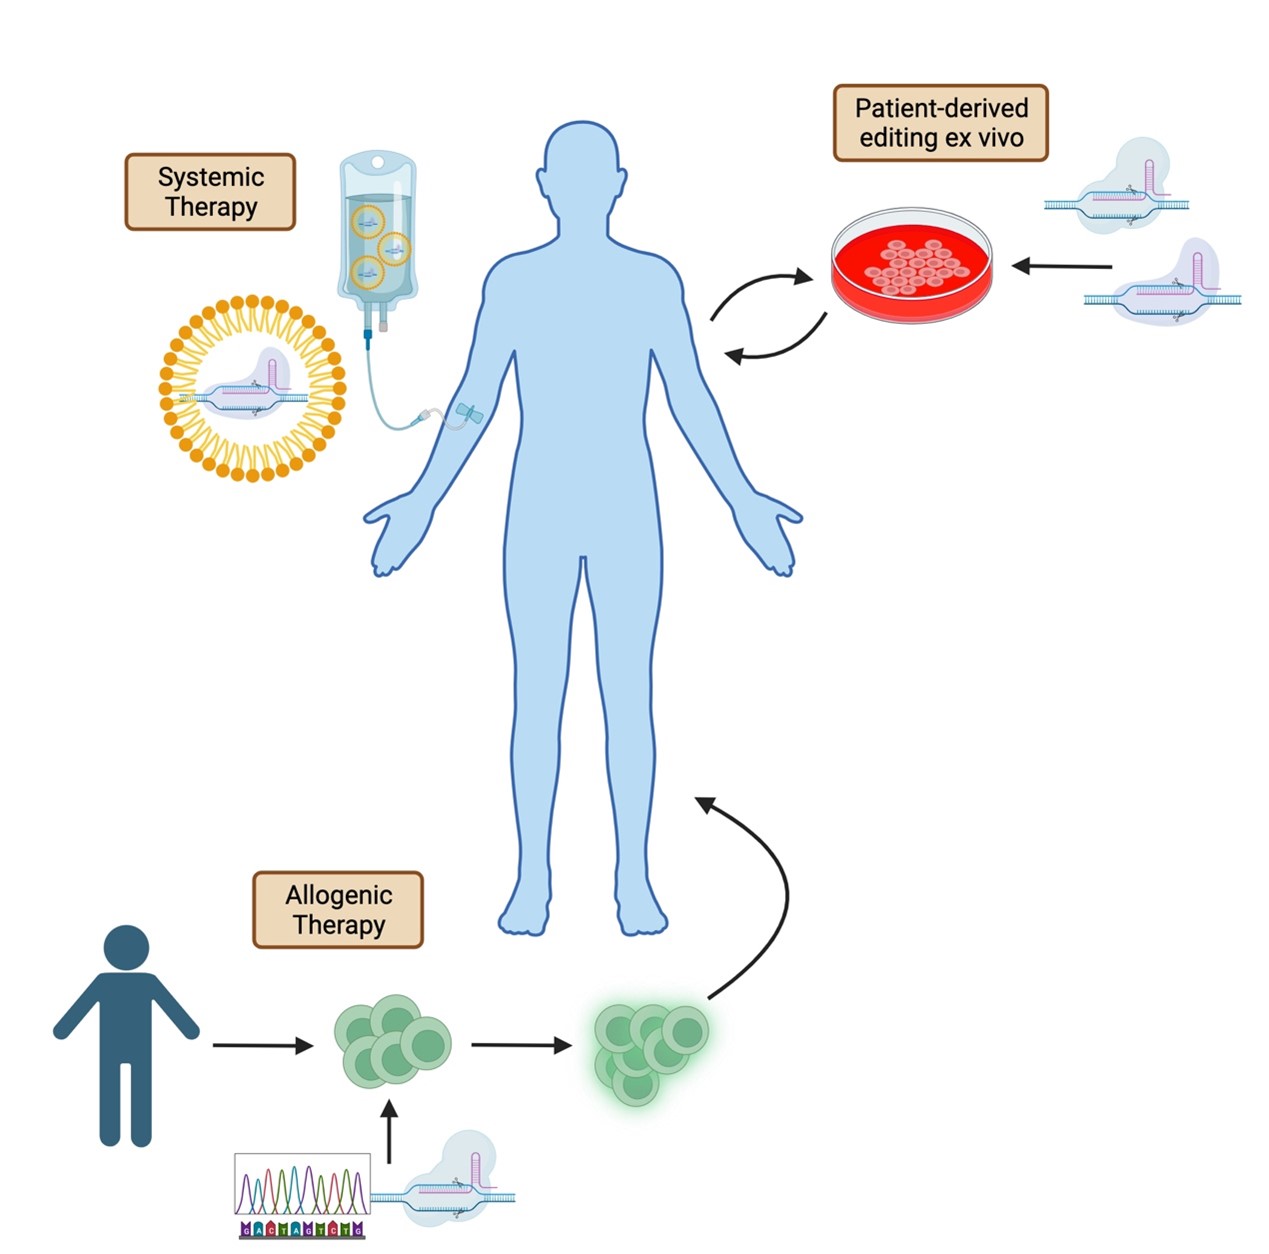 Schematic of a human body with cartoons indicating systemic therapy (via IV); patient-derived editing ex vivo (via cell culture); and allogenic therapy (via cells derived from another person).